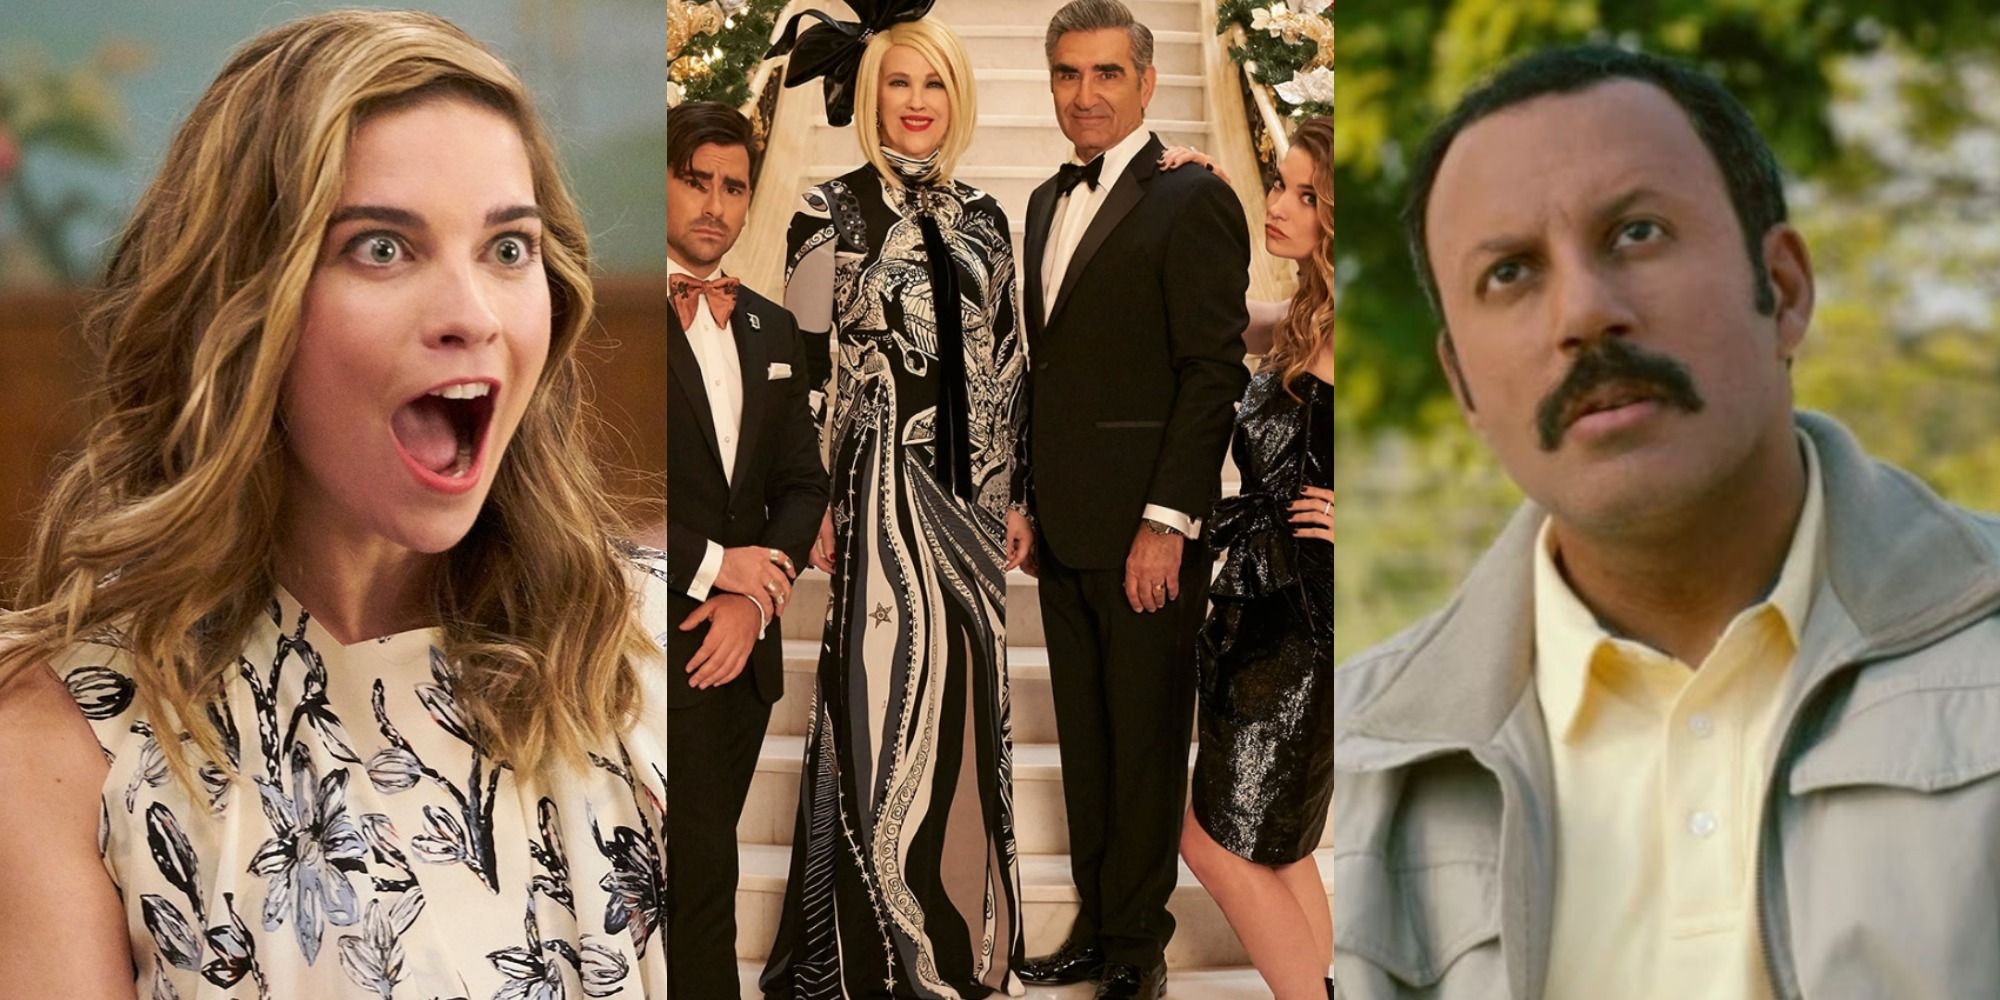 Side by side images of Alexis and Ray from Schitt's Creek flanking the Rose family posing for the camera